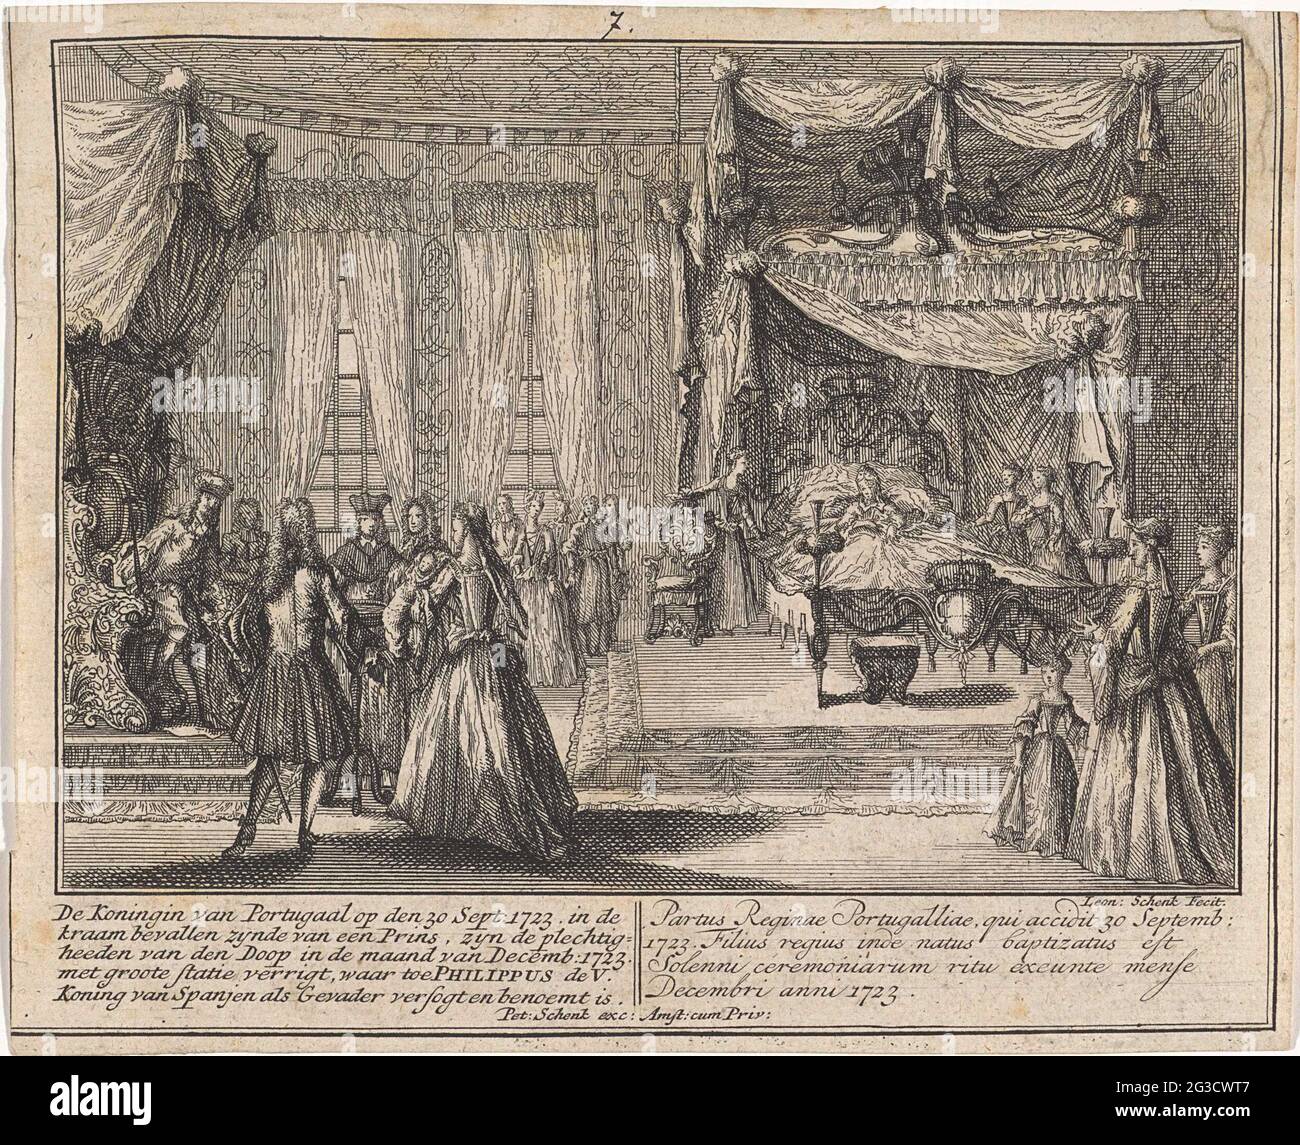 Baptism of the Spanish Infant; The queen of Portugaal on Sept. 30. 1723  Giving birth to a prince to the ceremony of the baptism in the month of  Decemb. 1723 with great